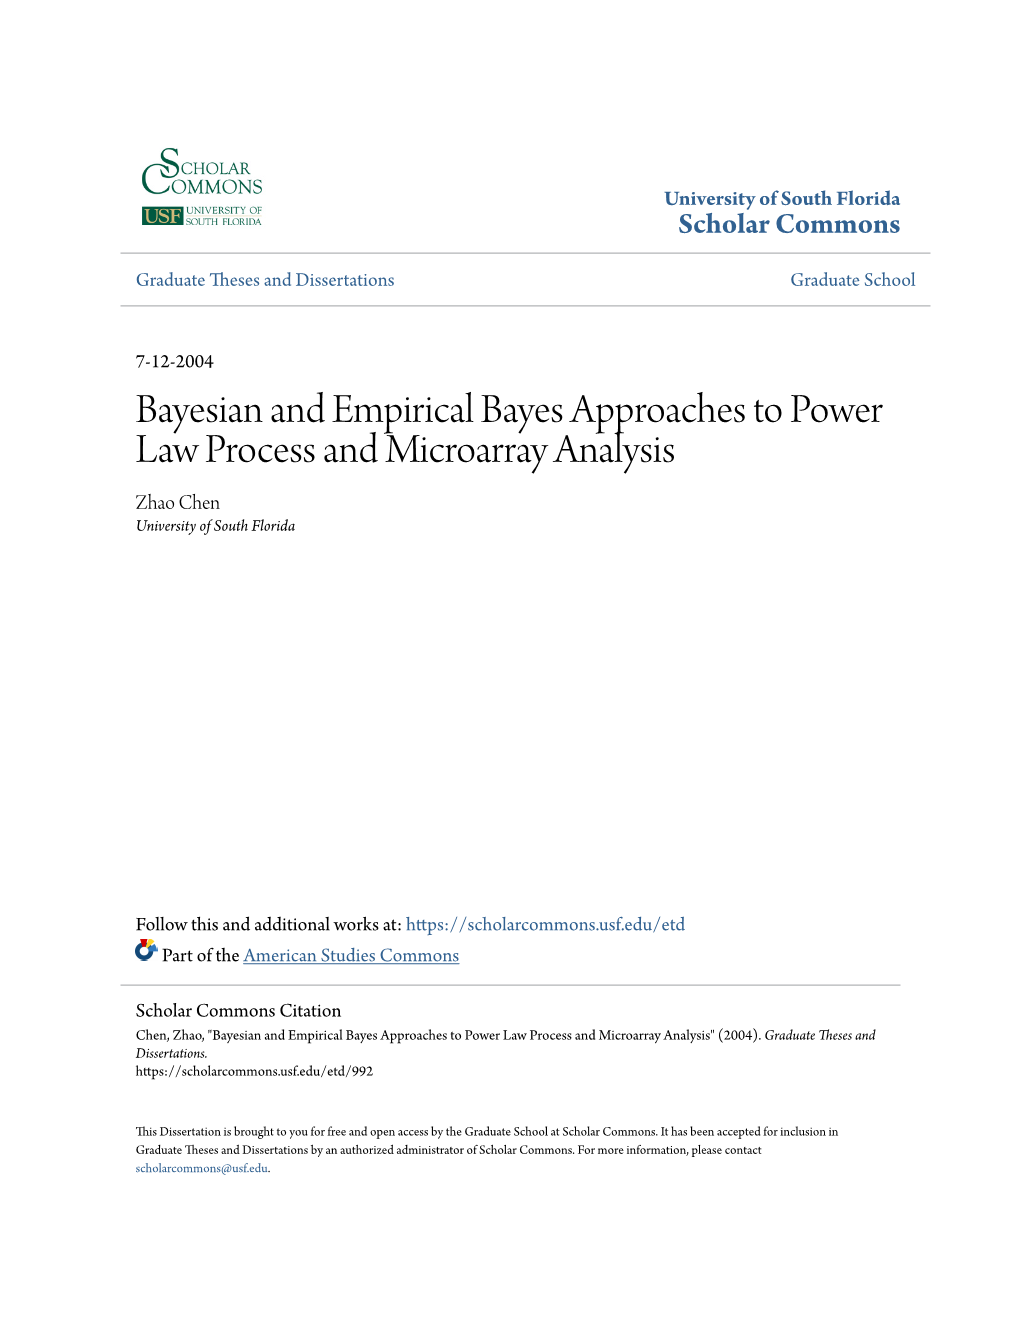 Bayesian and Empirical Bayes Approaches to Power Law Process and Microarray Analysis Zhao Chen University of South Florida